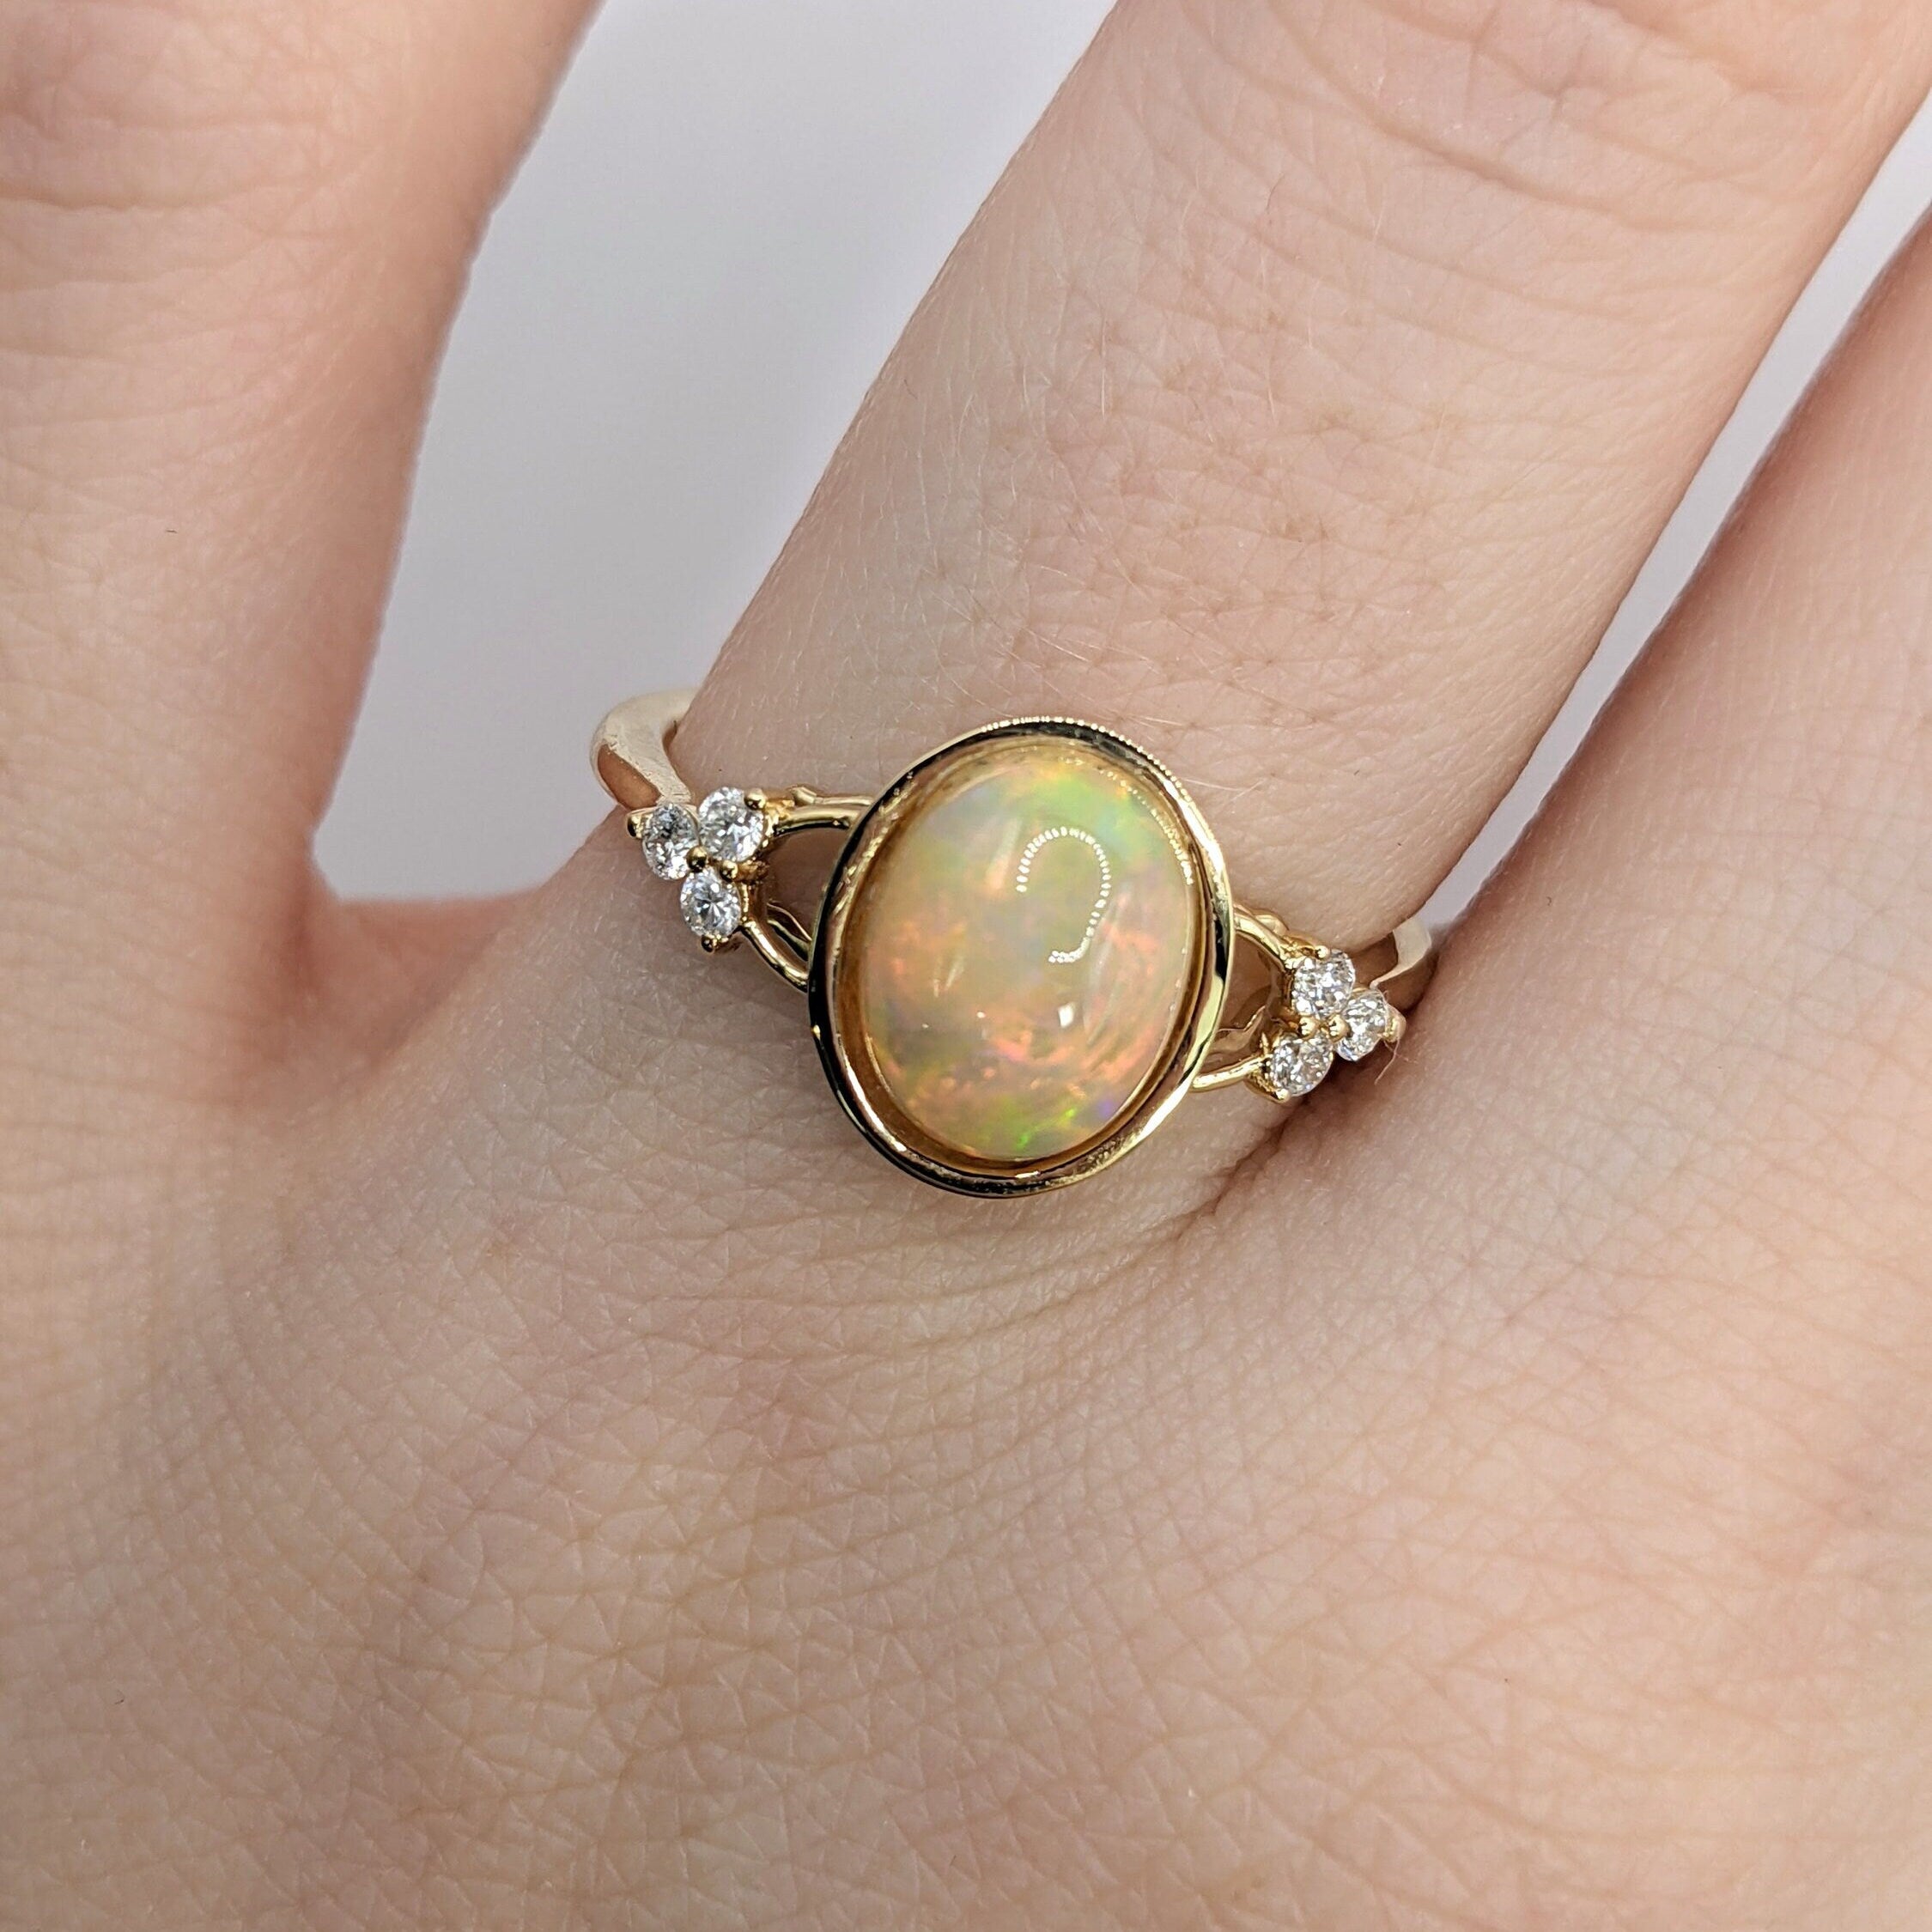 Statement Rings-Ethiopian Opal Ring with 14k Solid Yellow Gold and All Natural Diamond Accents / Oval 9x7mm / Rainbow Gemstone / Unique Jewelry Gift - NNJGemstones